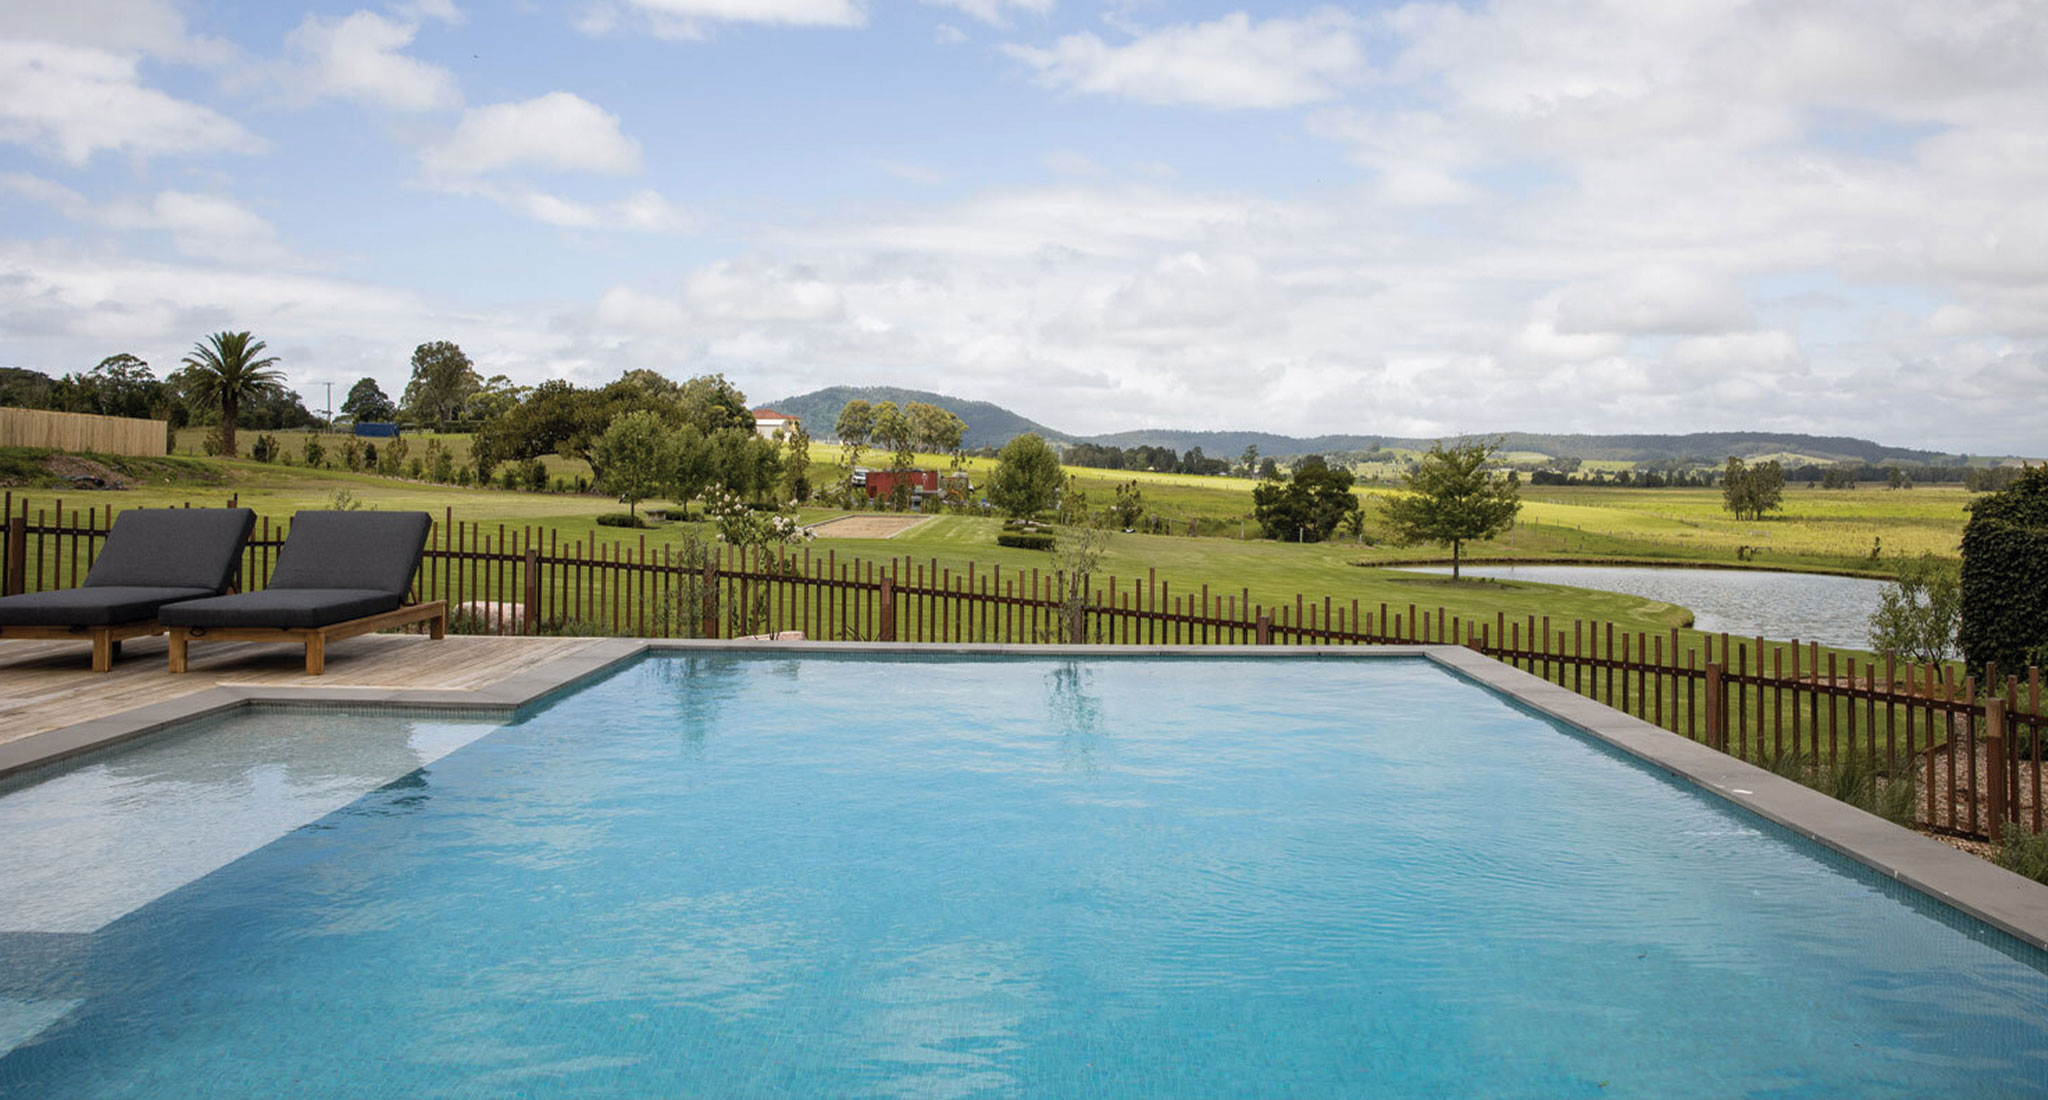 Landscape shot of pool facing out into the Australian countryside. Hills and green grass in the distance and a lake. The pool has crystal clear water and two deck chairs are on the left.